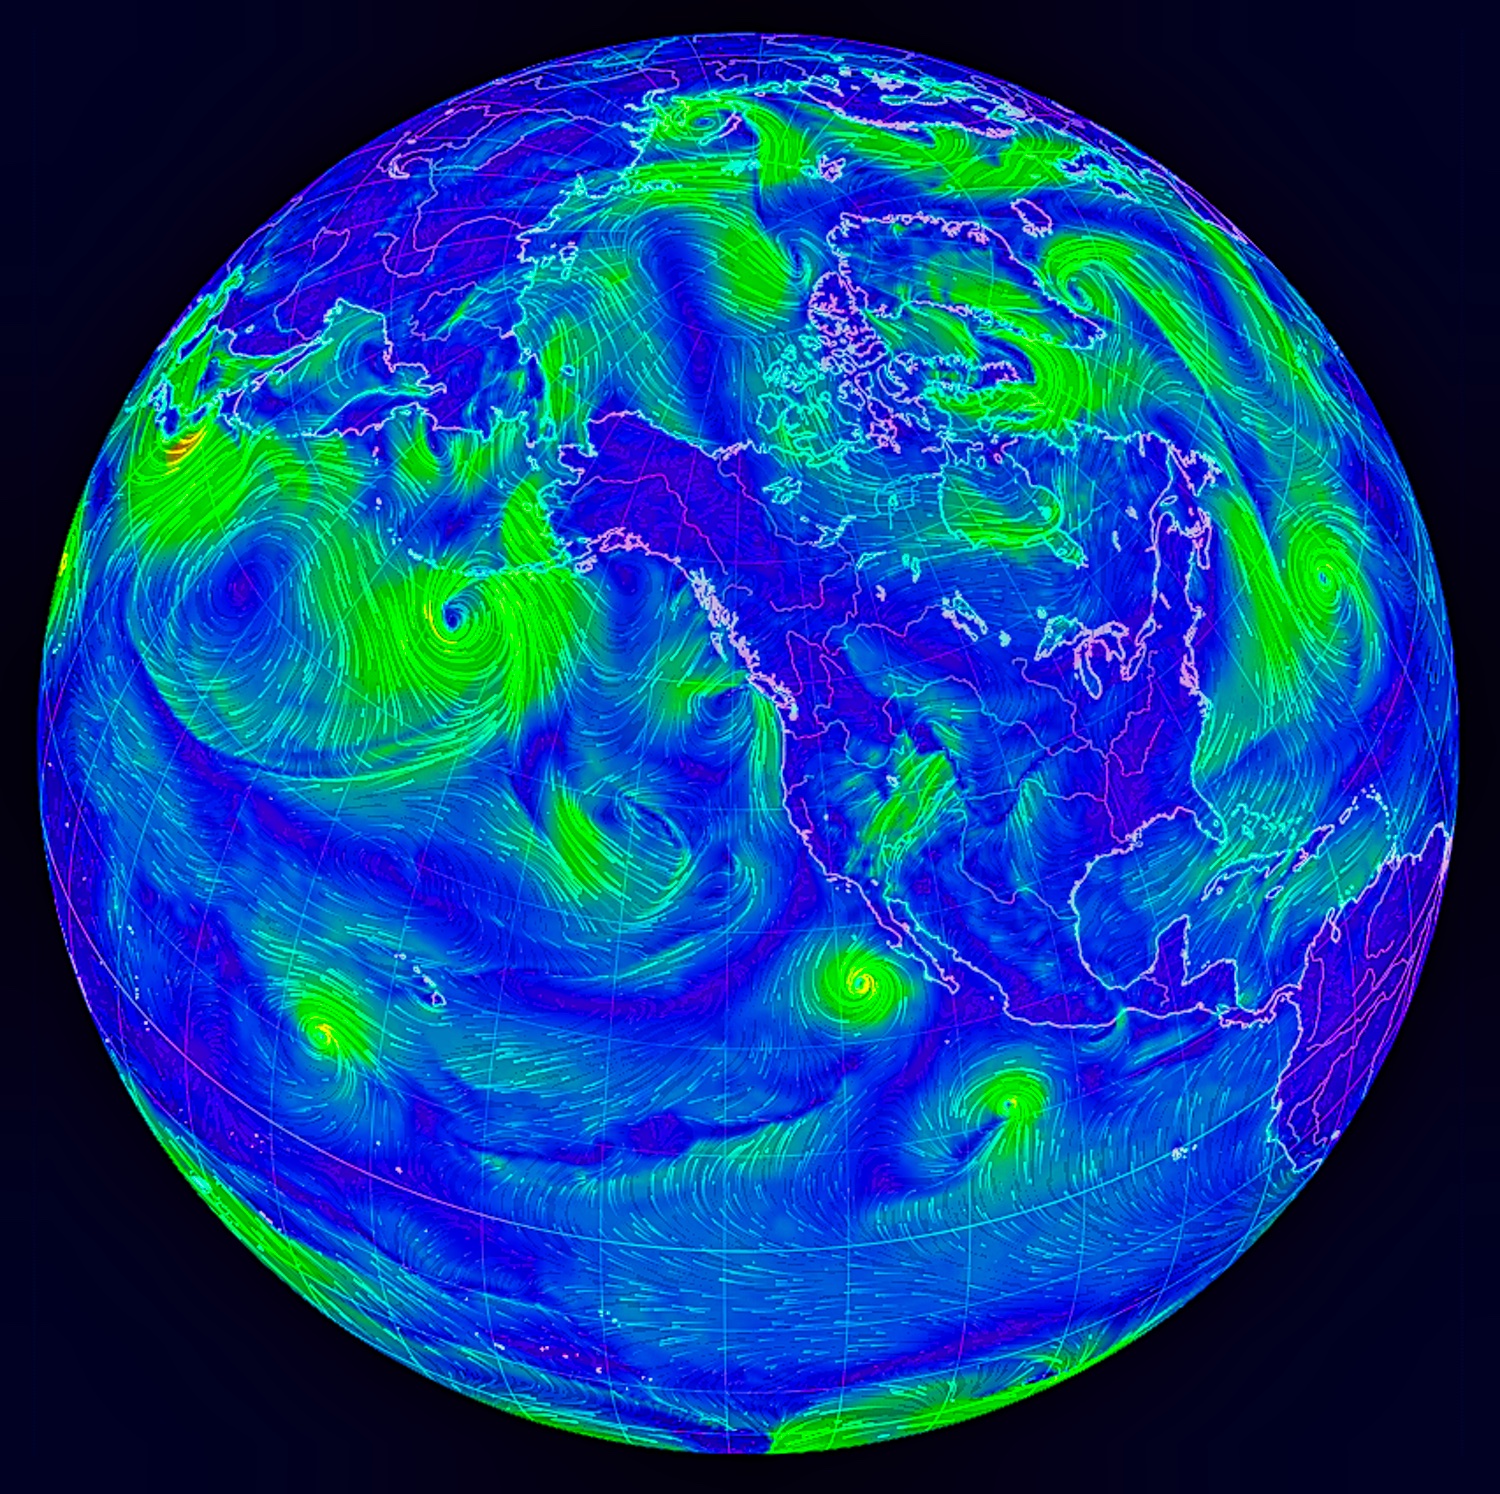 The Earth showing wind patterns